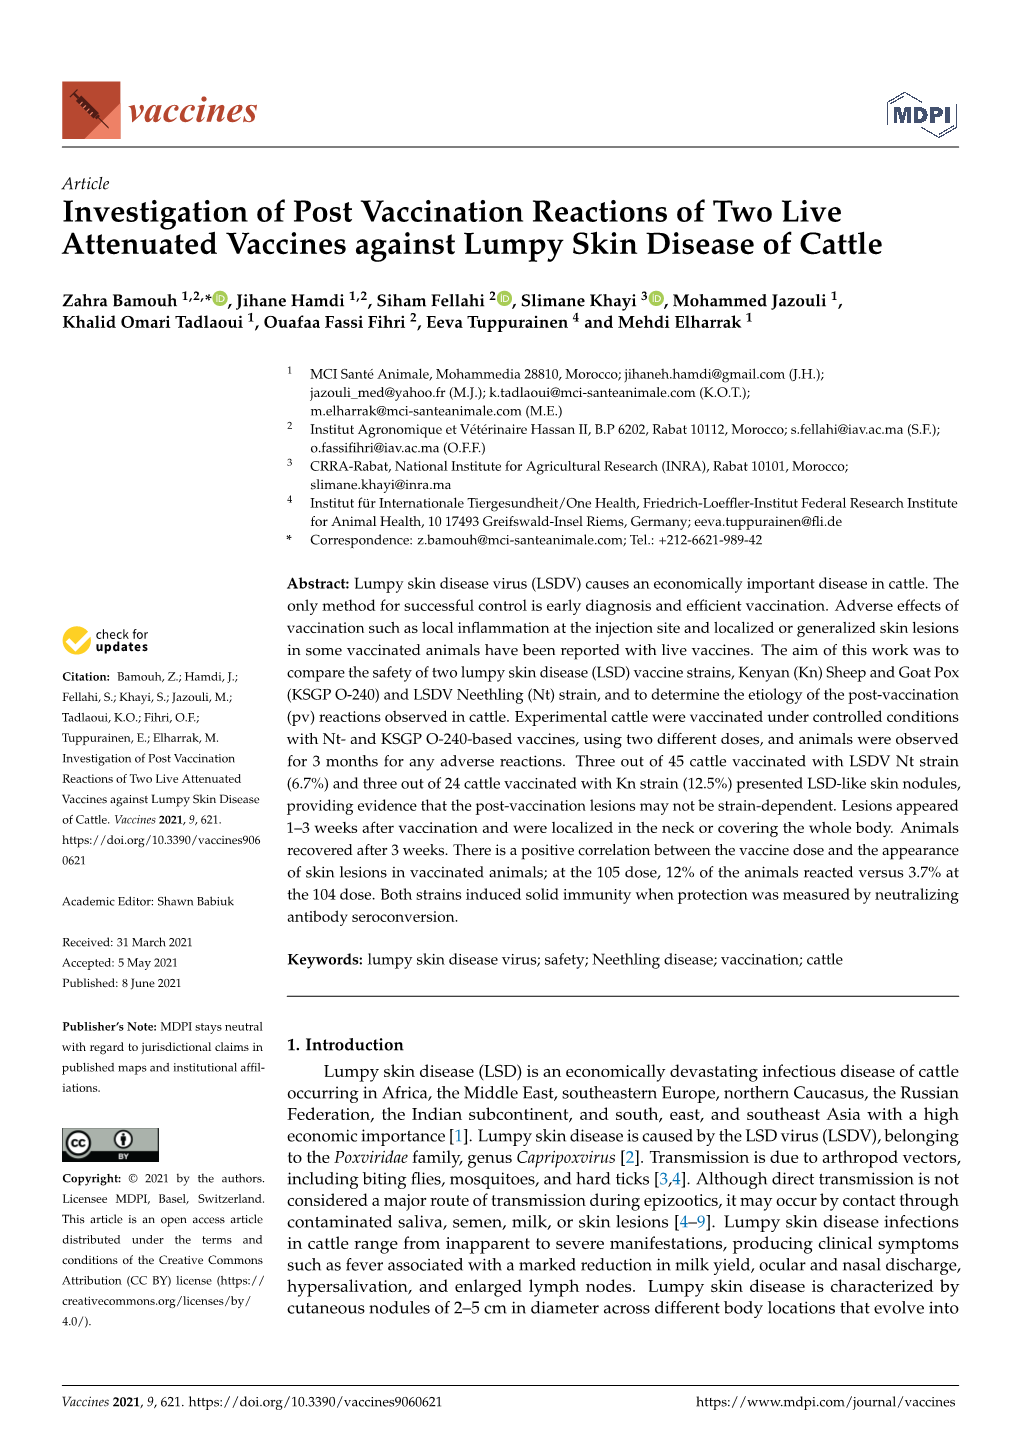 Investigation of Post Vaccination Reactions of Two Live Attenuated Vaccines Against Lumpy Skin Disease of Cattle